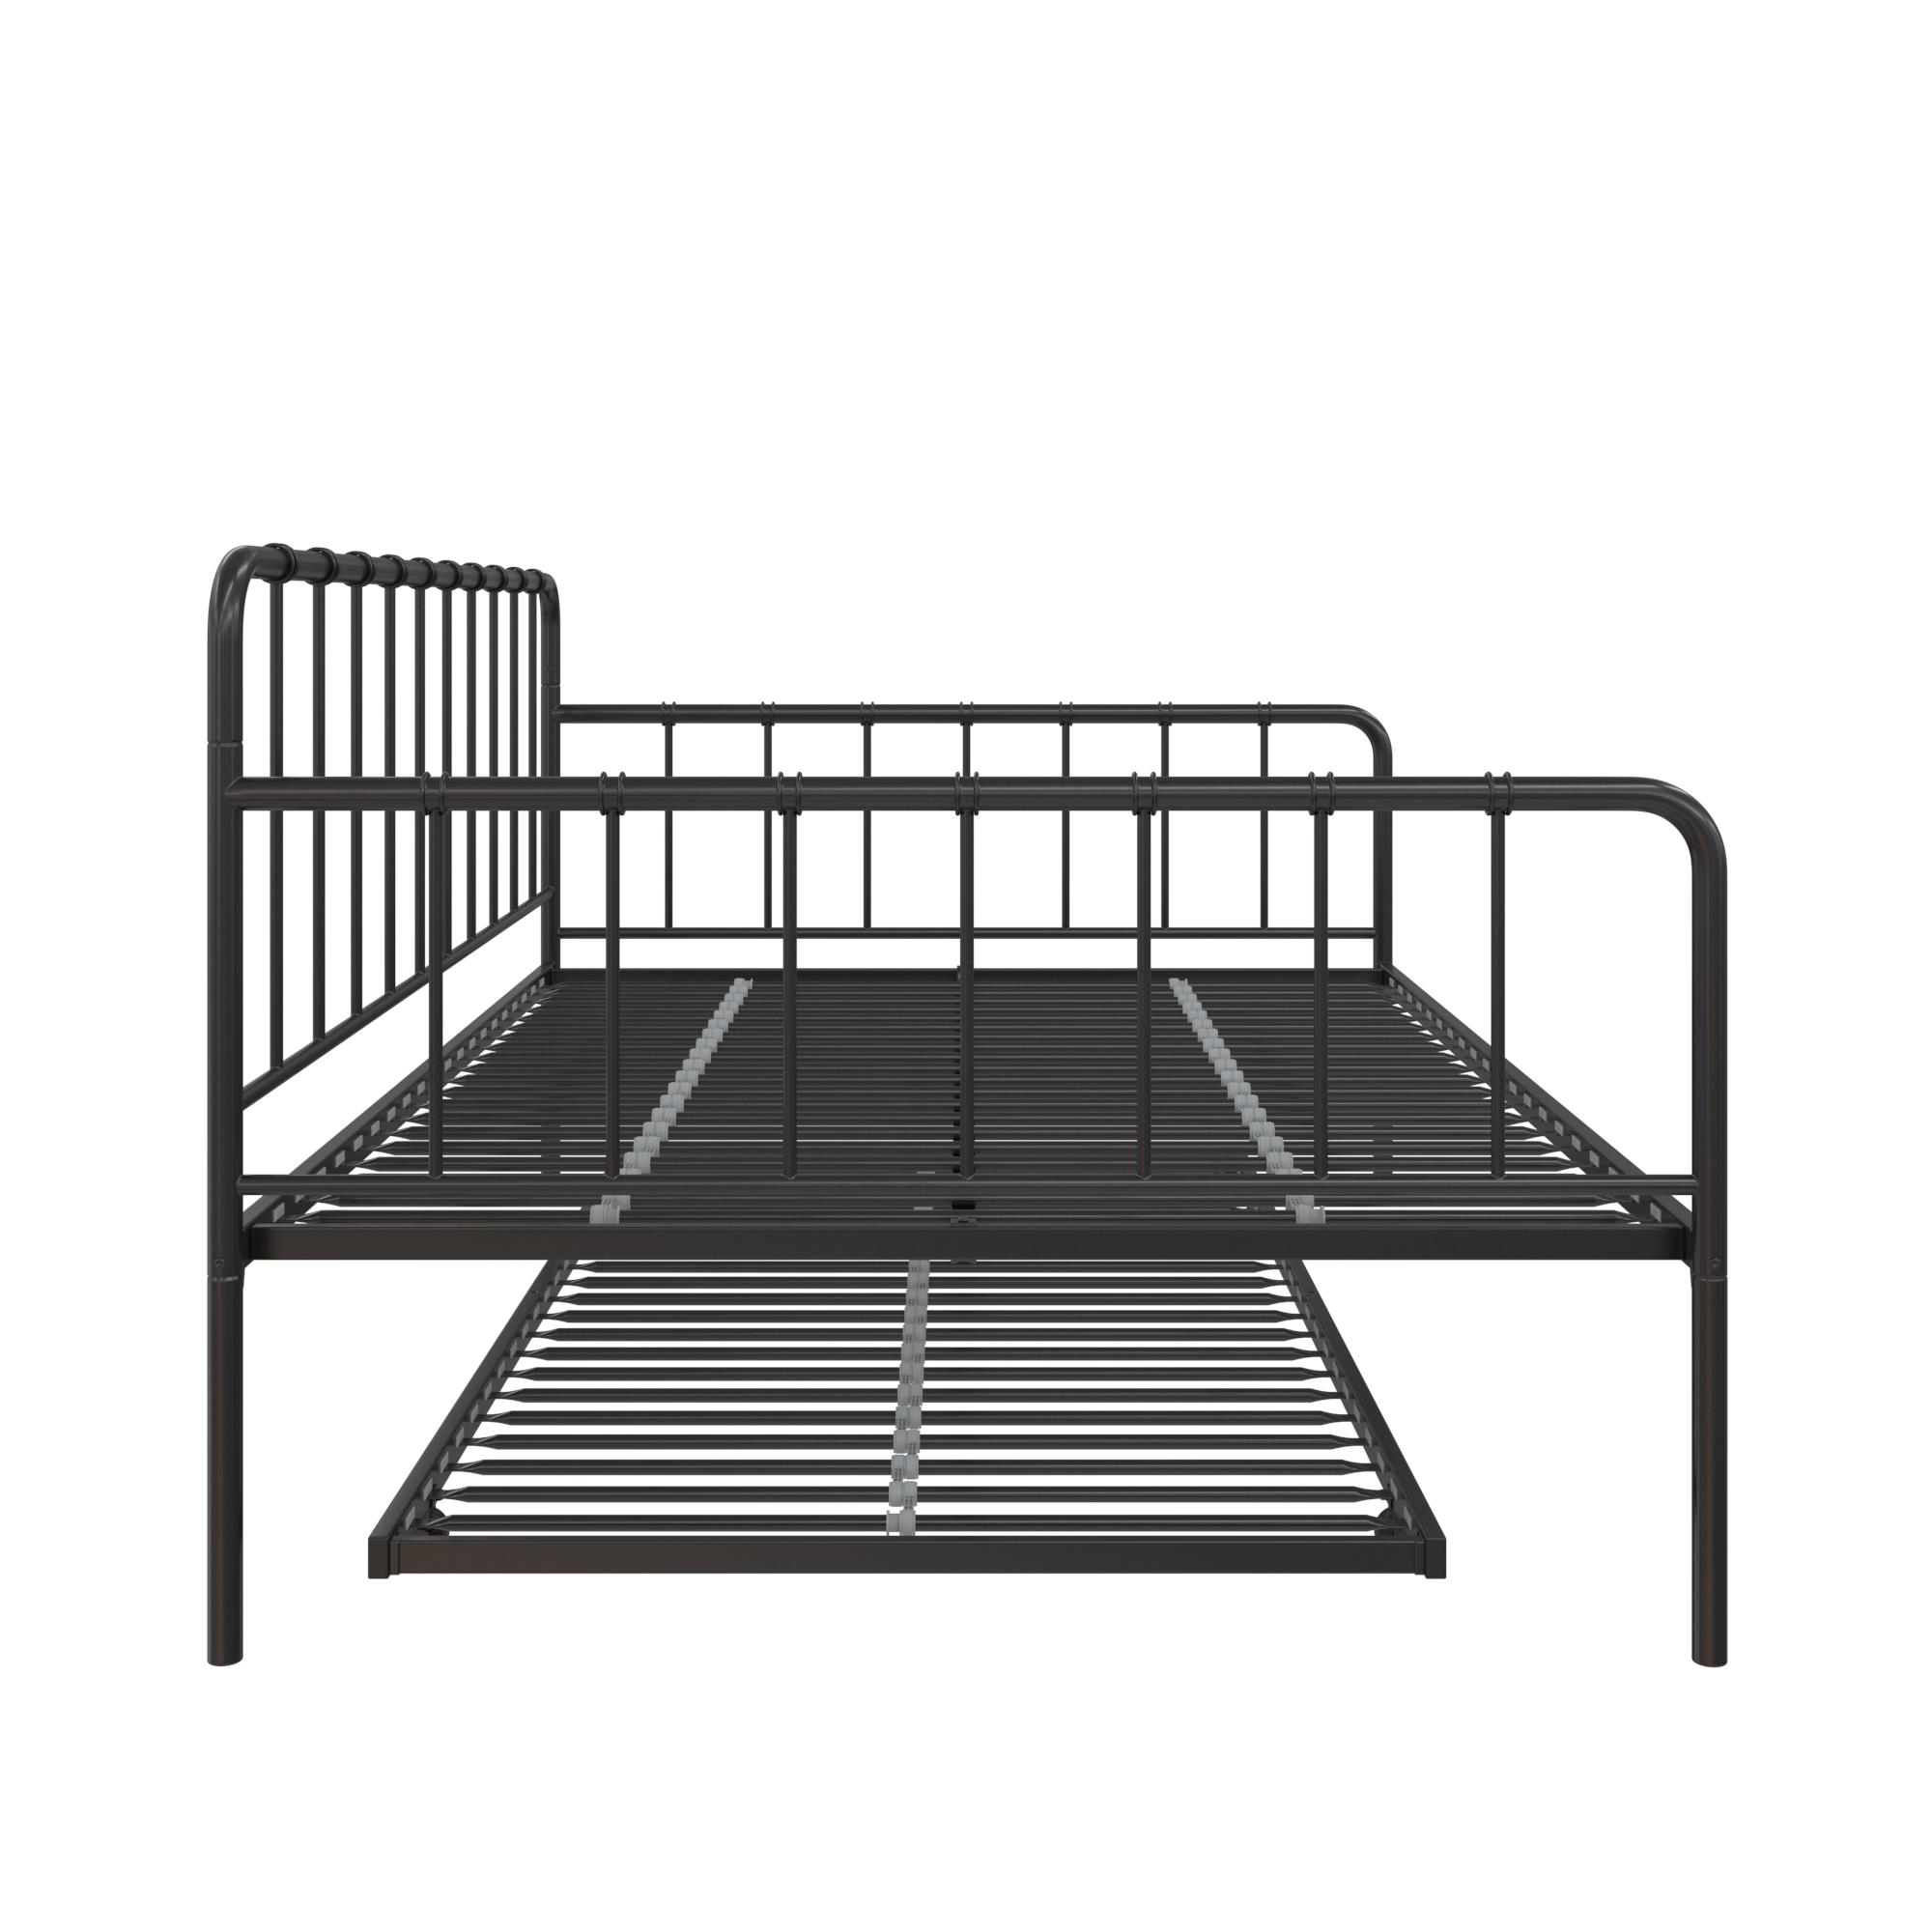 River Street Designs Thomas Metal Daybed And Trundle Set, Full Over Twin Frame, Black - image 5 of 14